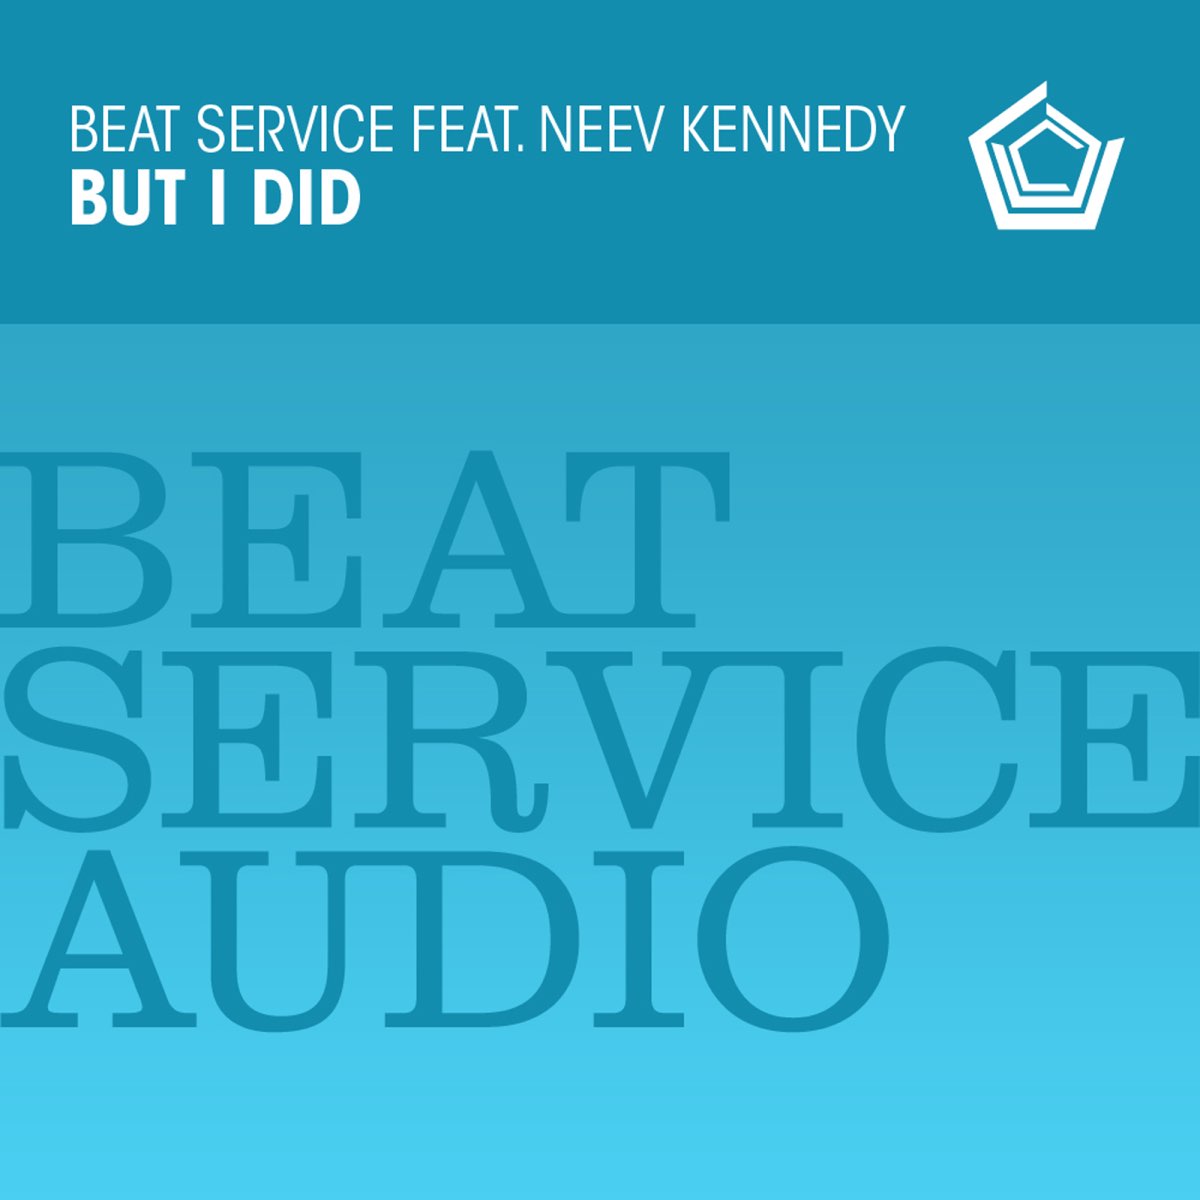 Beat service. Beat service feat. Neev Kennedy - but i did (Eximinds Remix). Neev Kennedy. Beat service - but i did - Extended. Beat service & Neev Kennedy not this time (Original Mix).